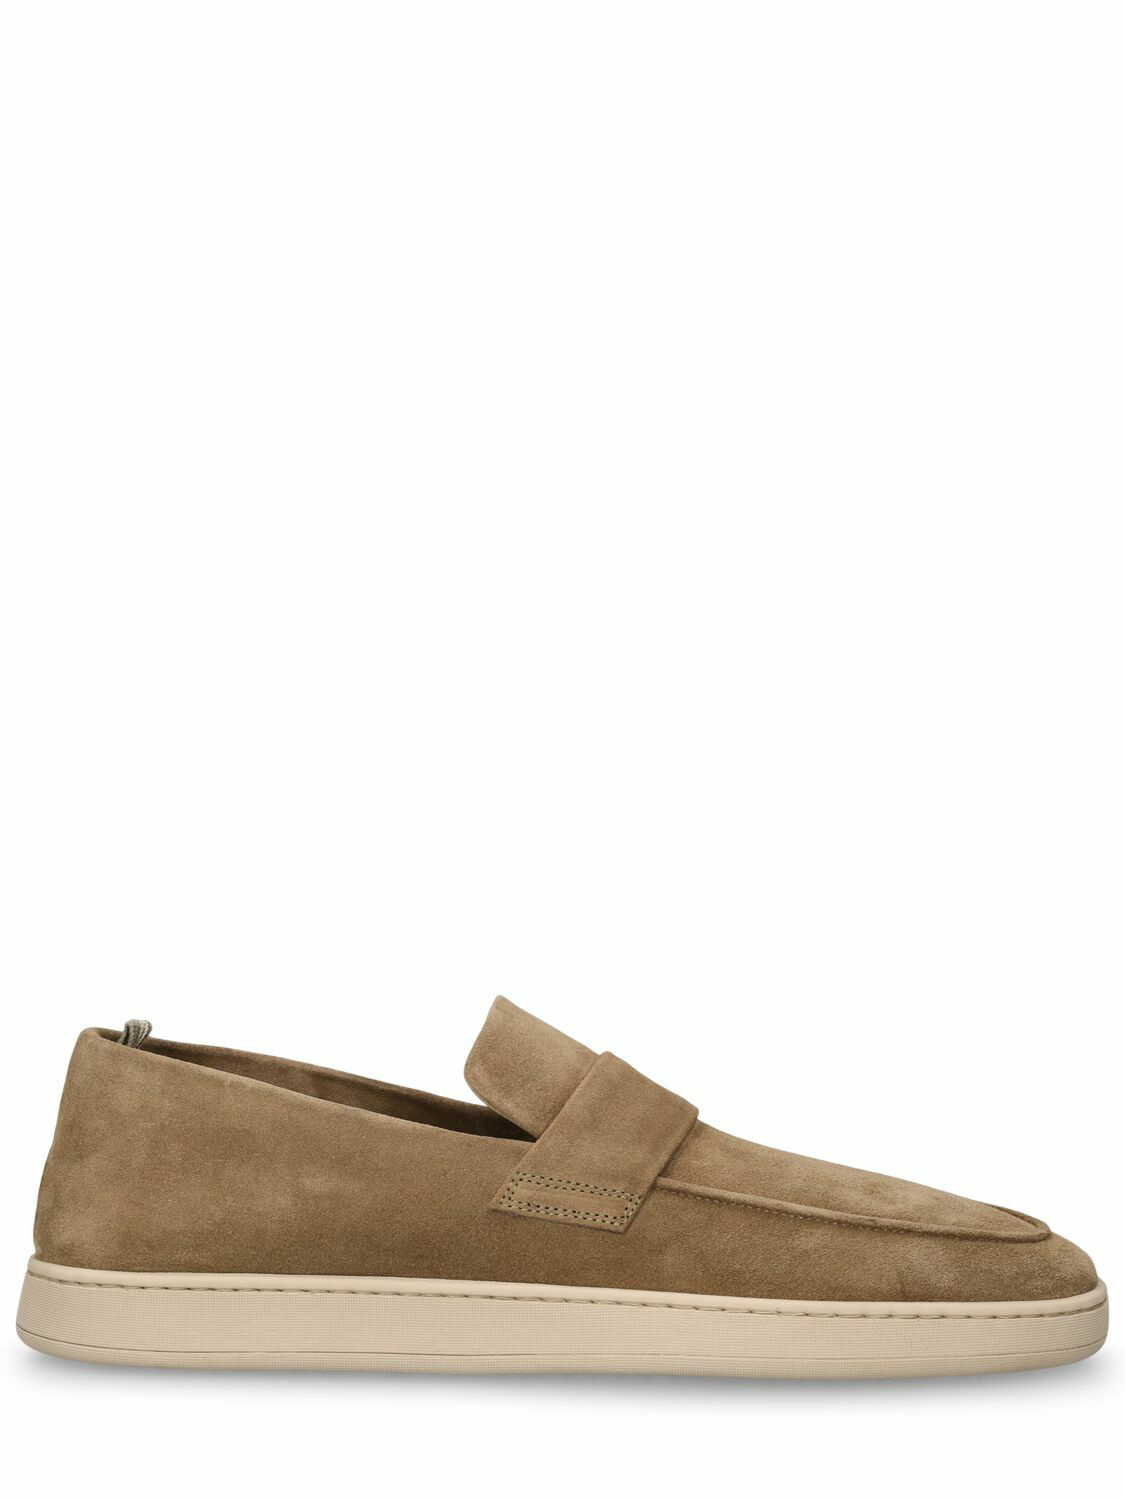 Photo: OFFICINE CREATIVE - Herbie Suede Loafers